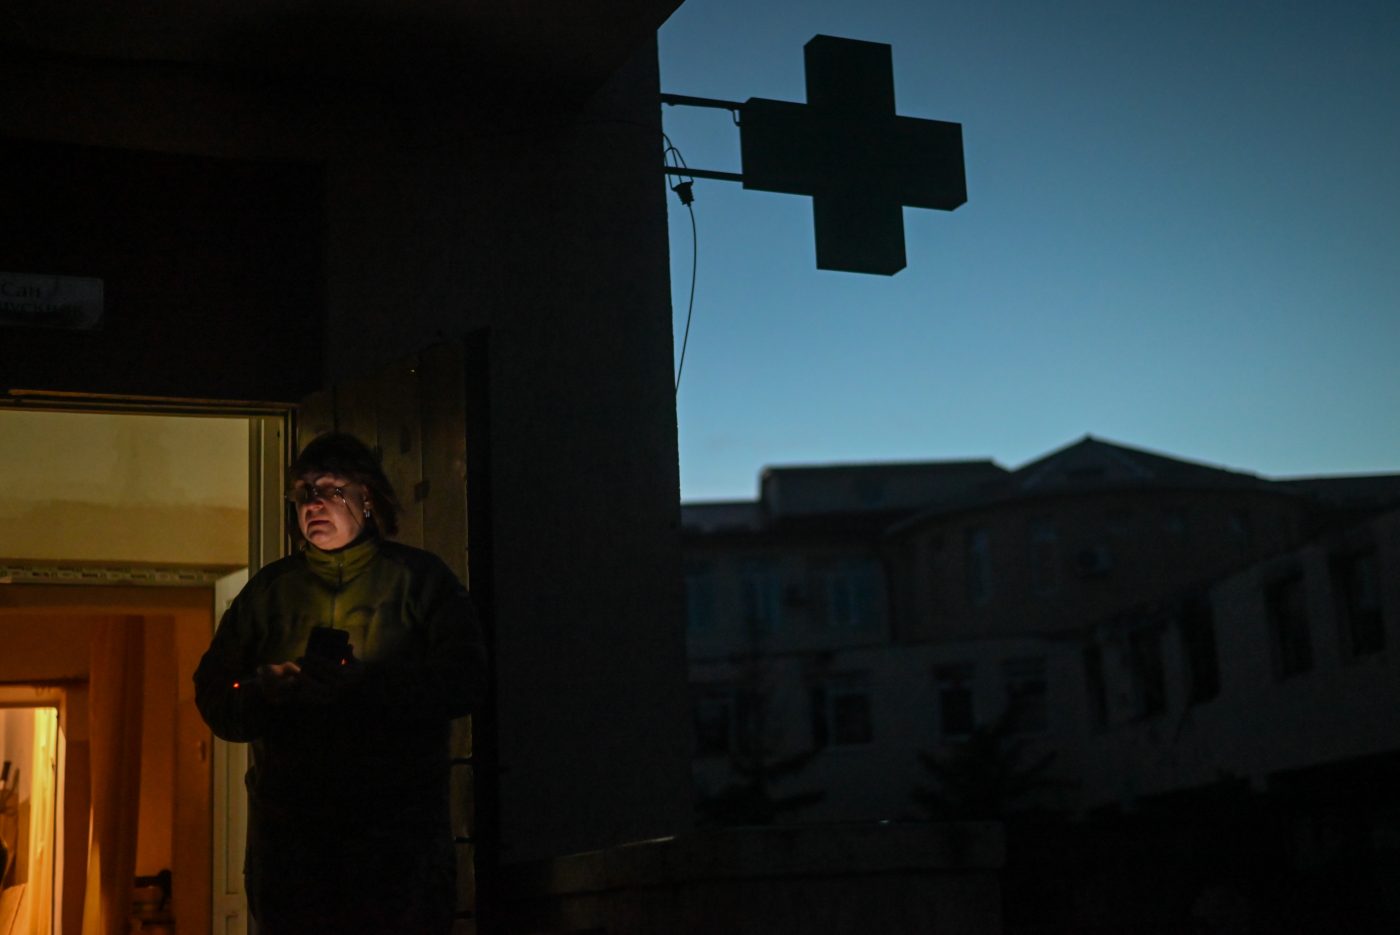 Photo: A nurse of the Ukrainian Armed Forces takes a short cigarette break at the entrance of the emergency room of a military hospital in Lyman on December 01, 2022. Ukrainian Armed Forces medics, doctors, and nurses stabilize wounded servicemembers and civilians in a hospital in Lyman before patients are transferred to other medical facilities for further treatment. Lyman, Ukraine. Credit: Photo by Justin Yau/ Sipa USA